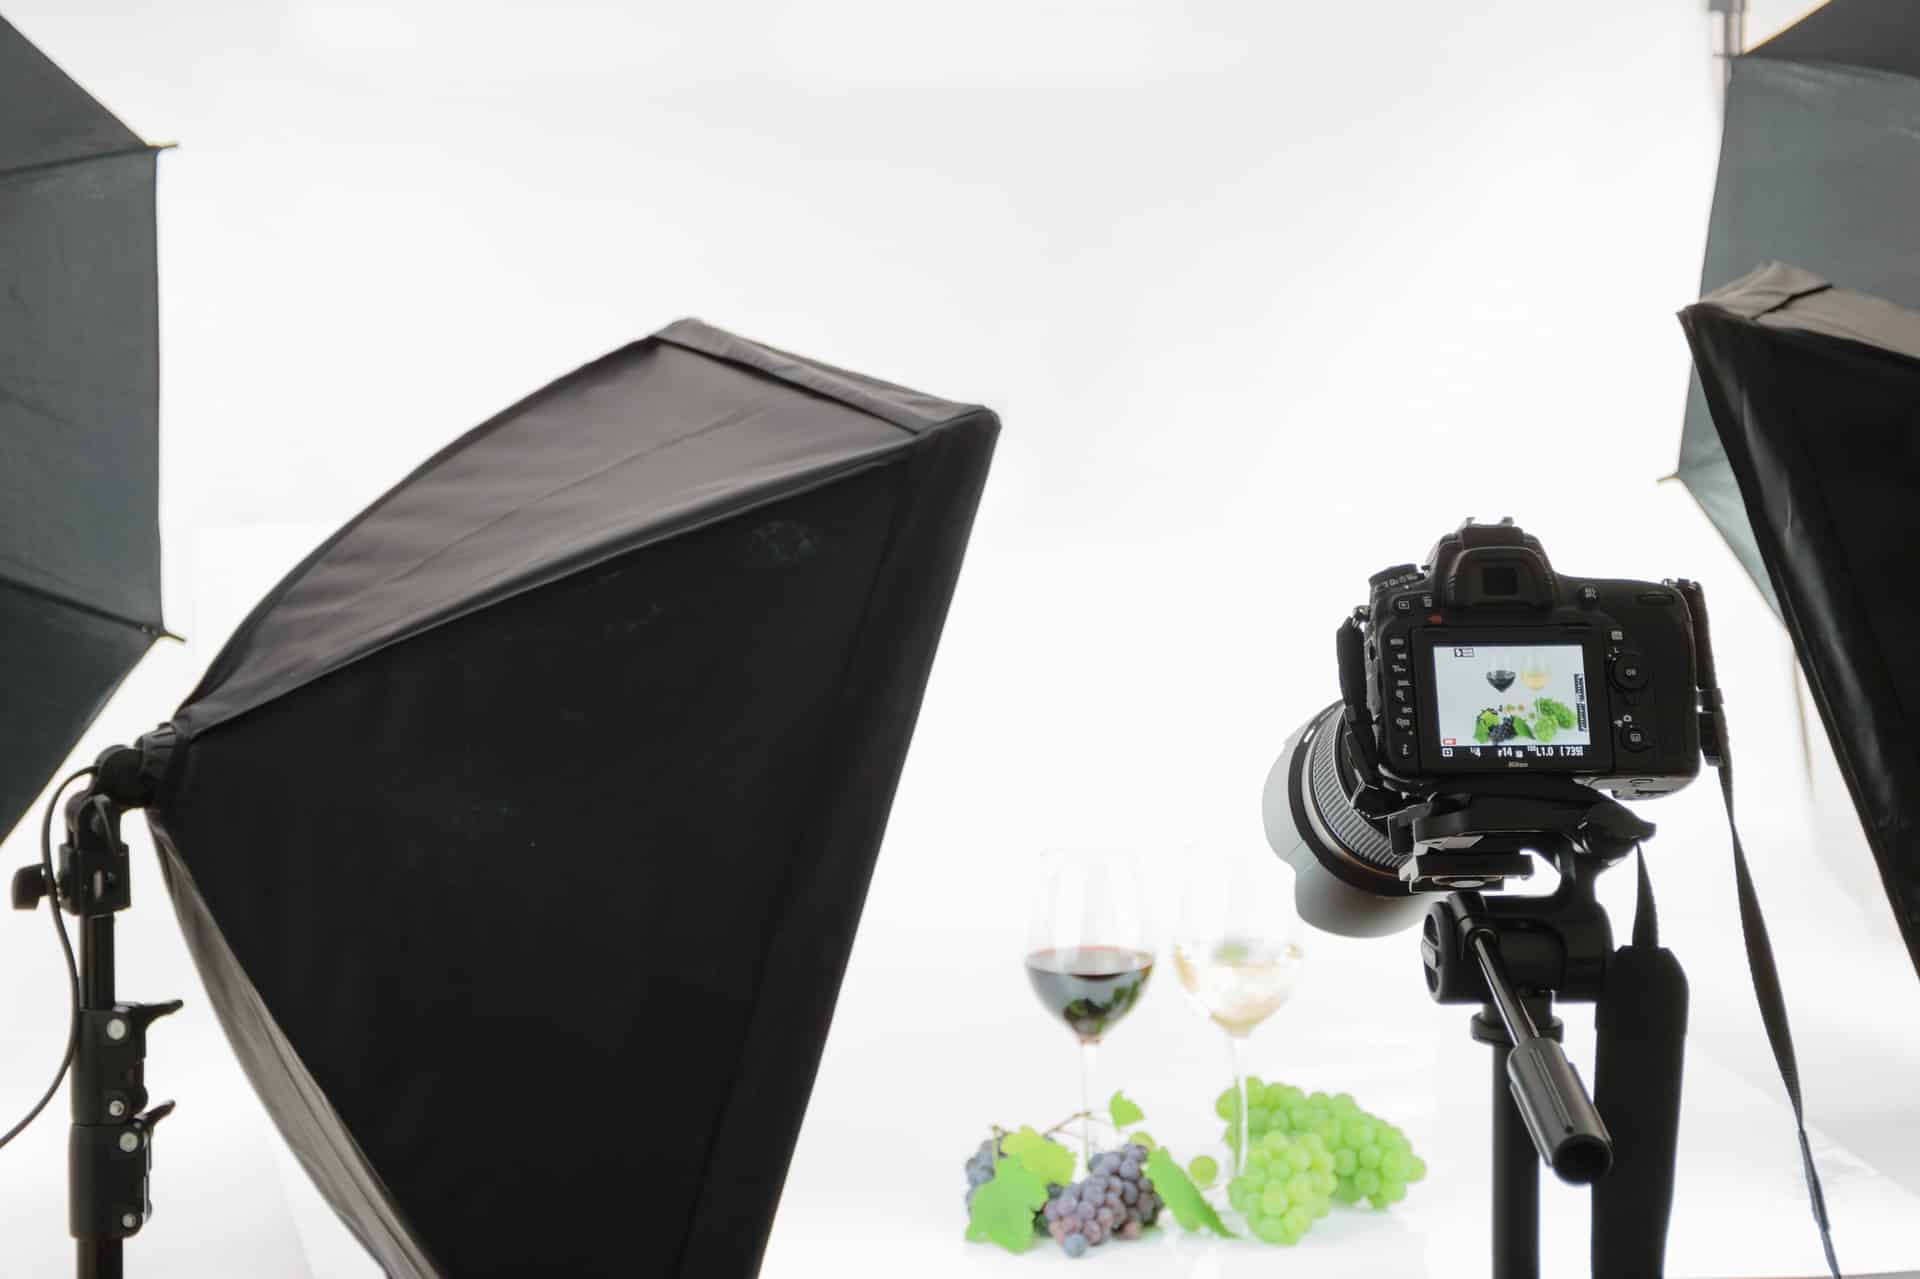 Setup for 360 product photography